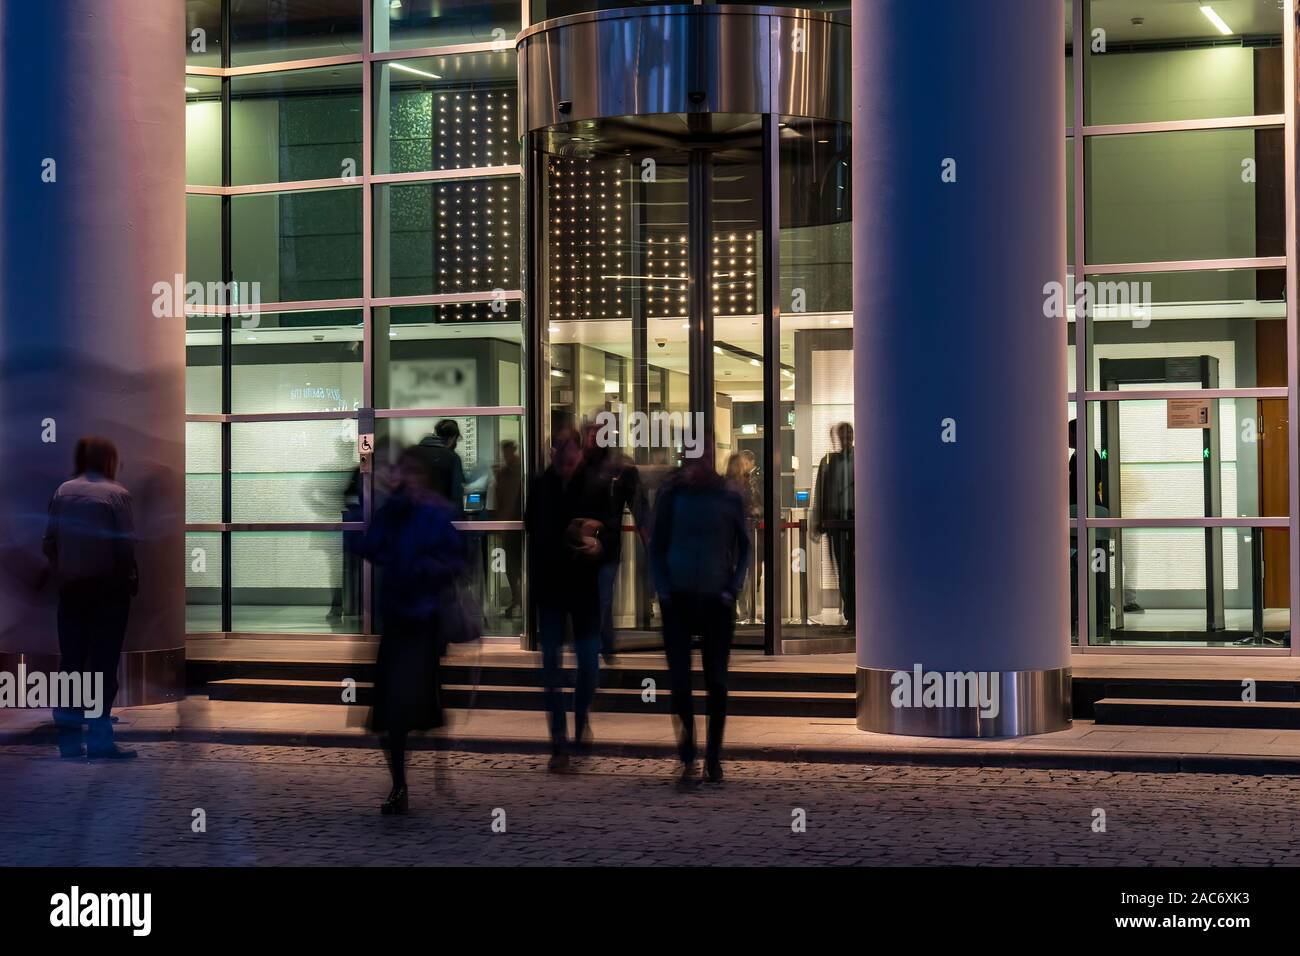 The movement of people at the entrance to modern building Stock Photo